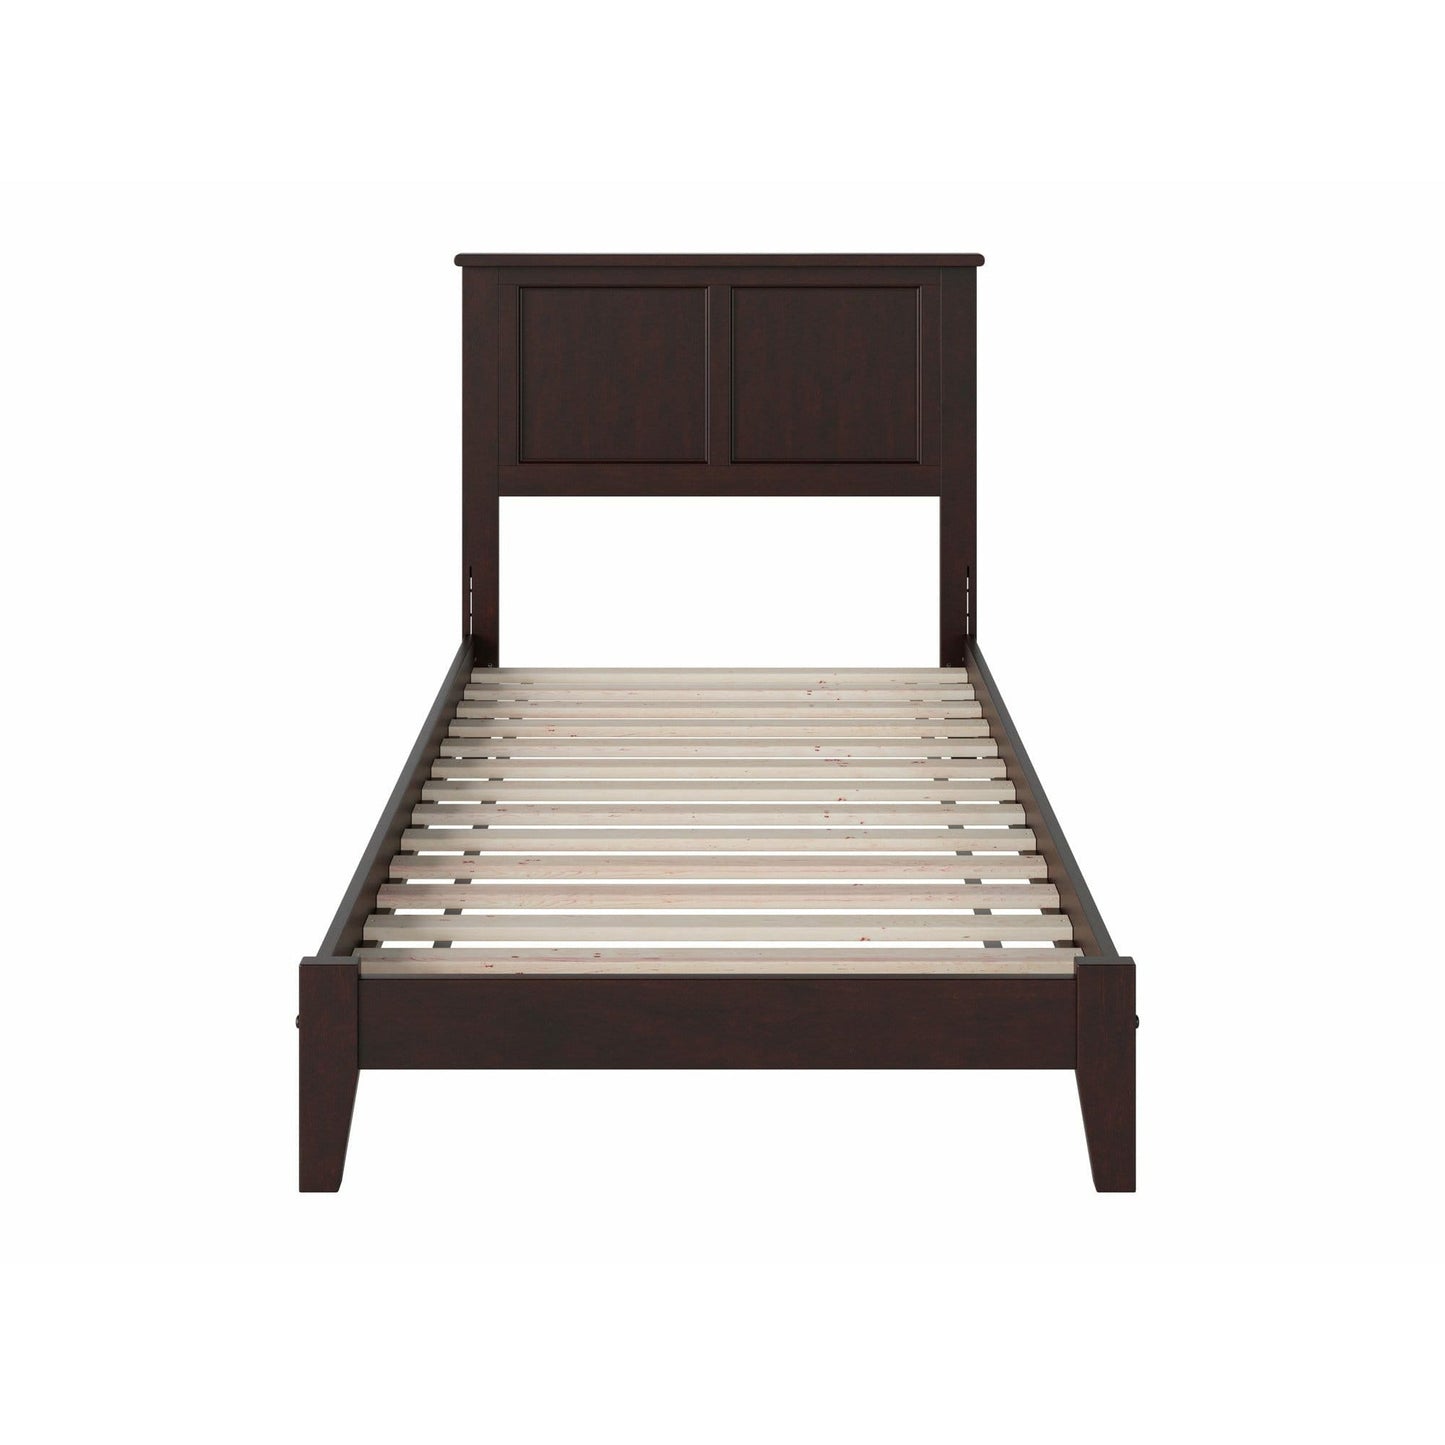 Atlantic Furniture Bed Madison Twin Platform Bed with Open Foot Board in Espresso